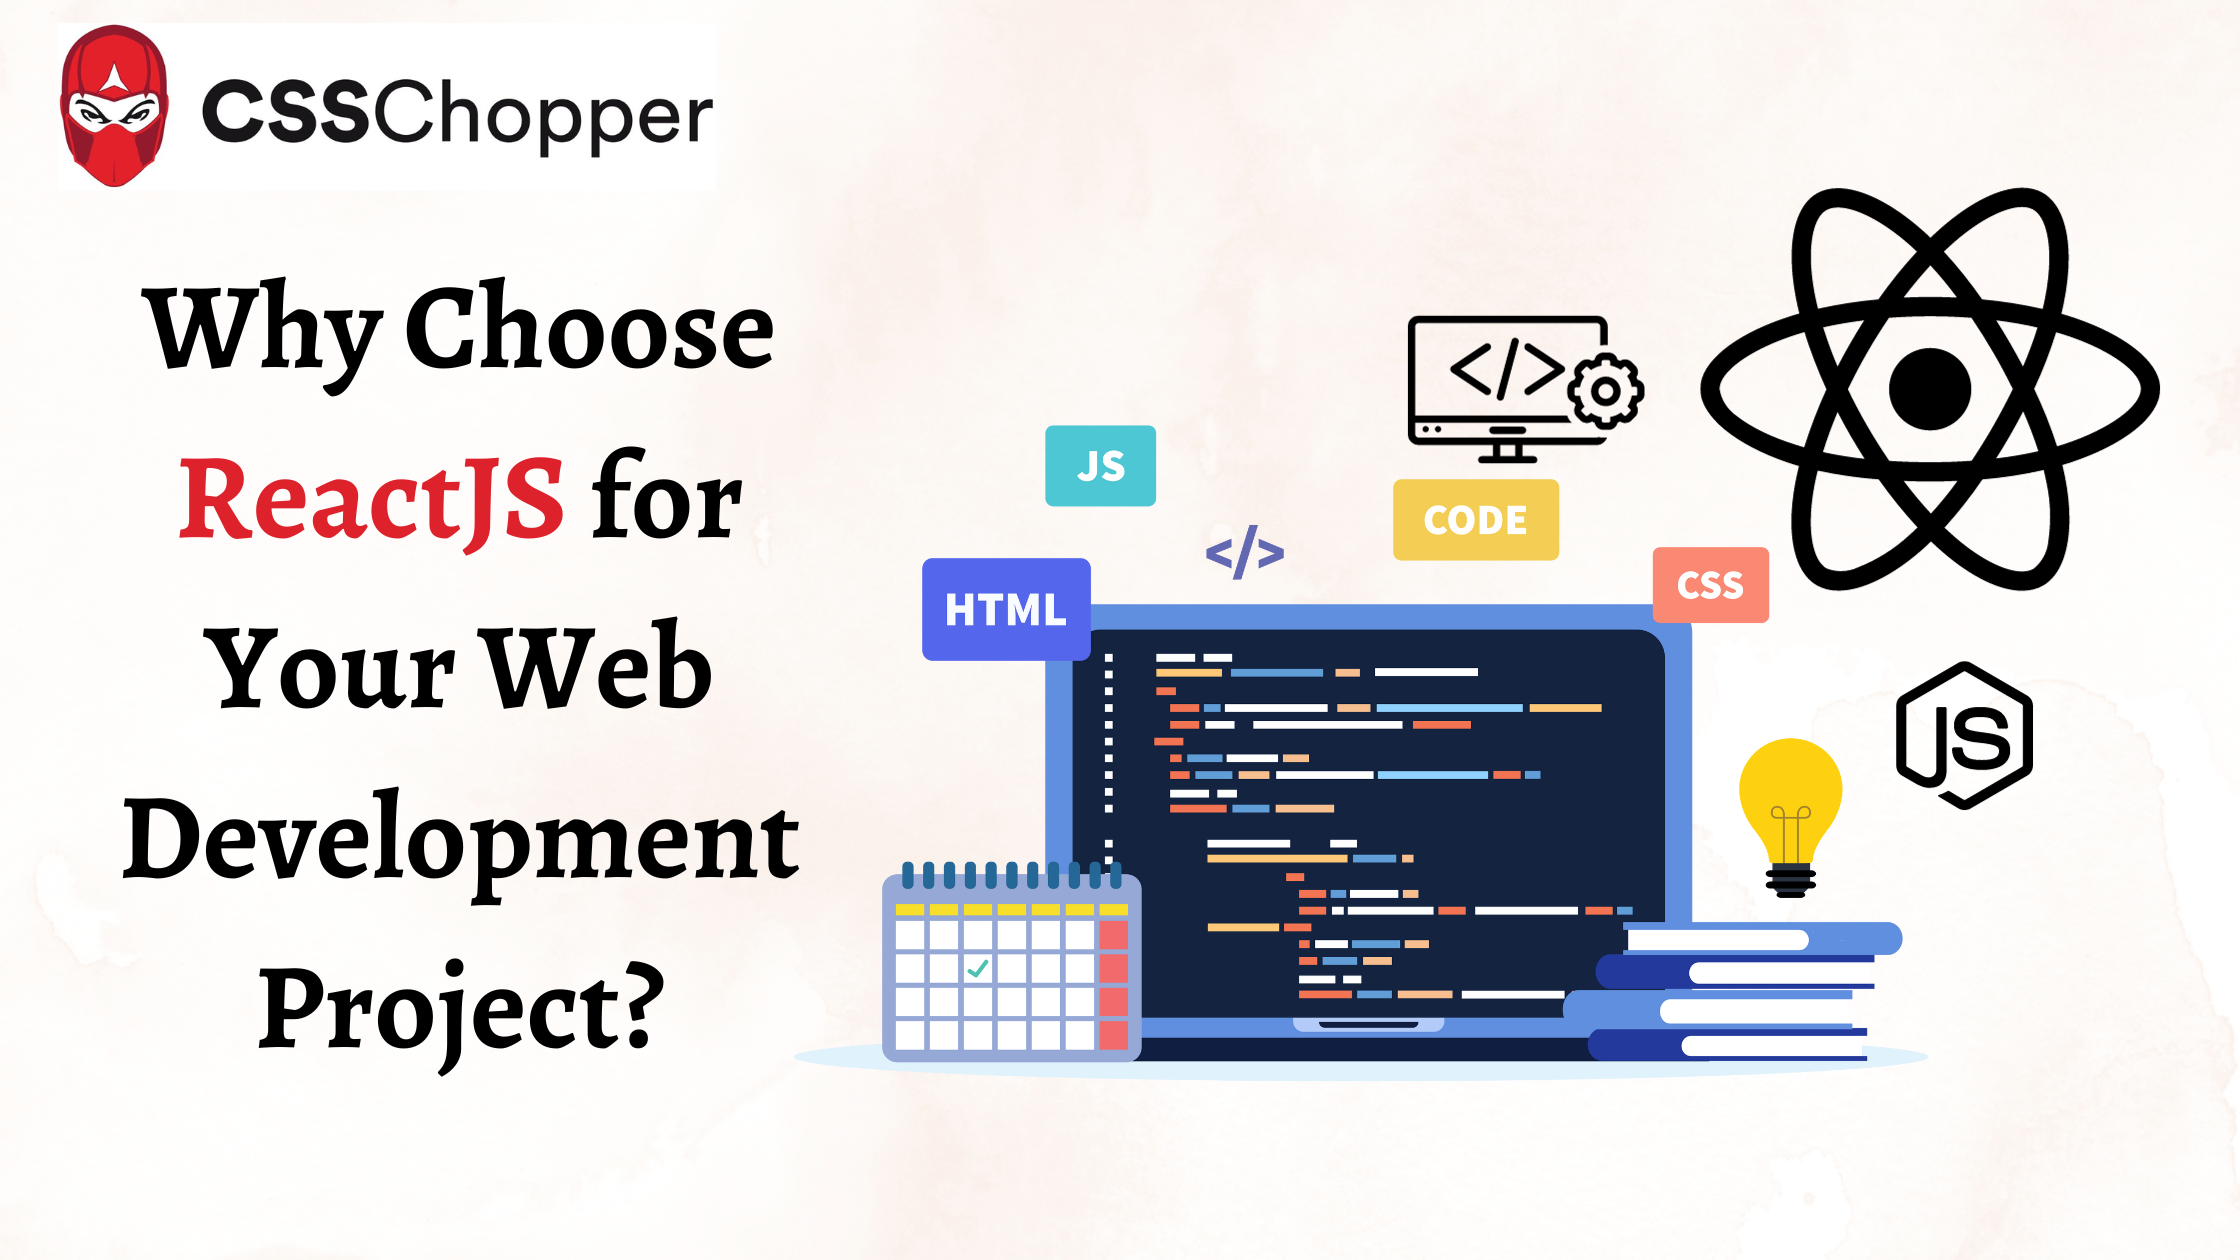 Why Choose ReactJS for Your Web Development Project?